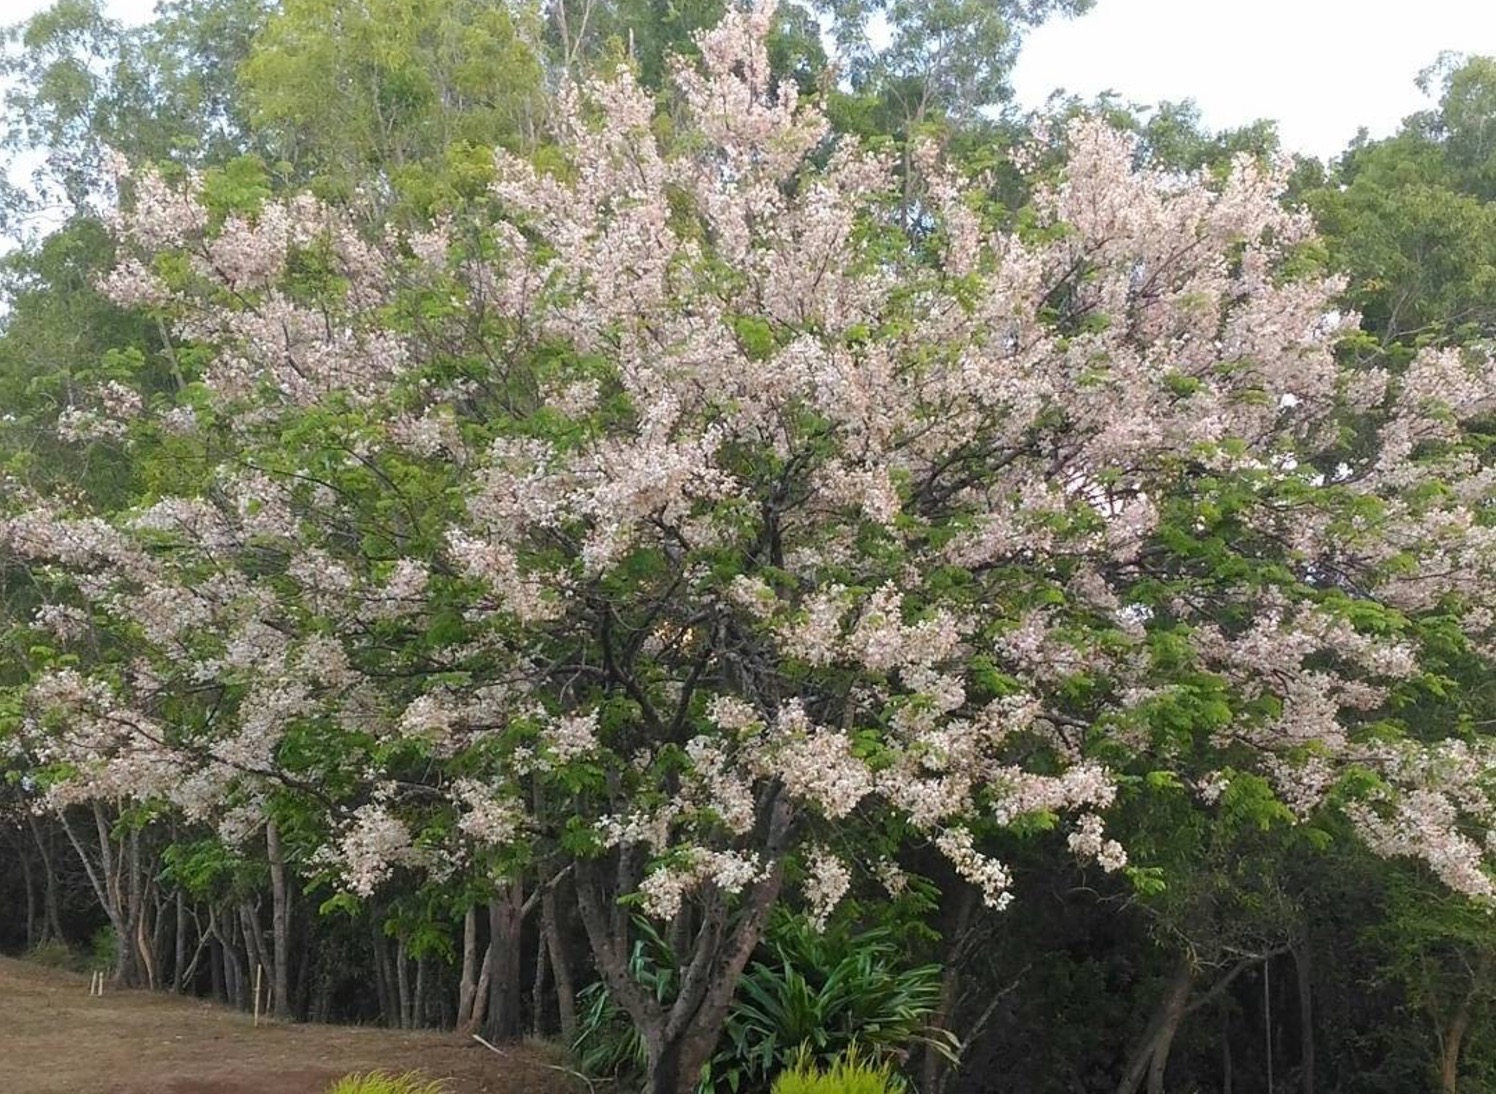 The Palawan Cherry Blossom is also known as Balayong. PHOTO: Instagram/Sharon Madriñan-Garcia